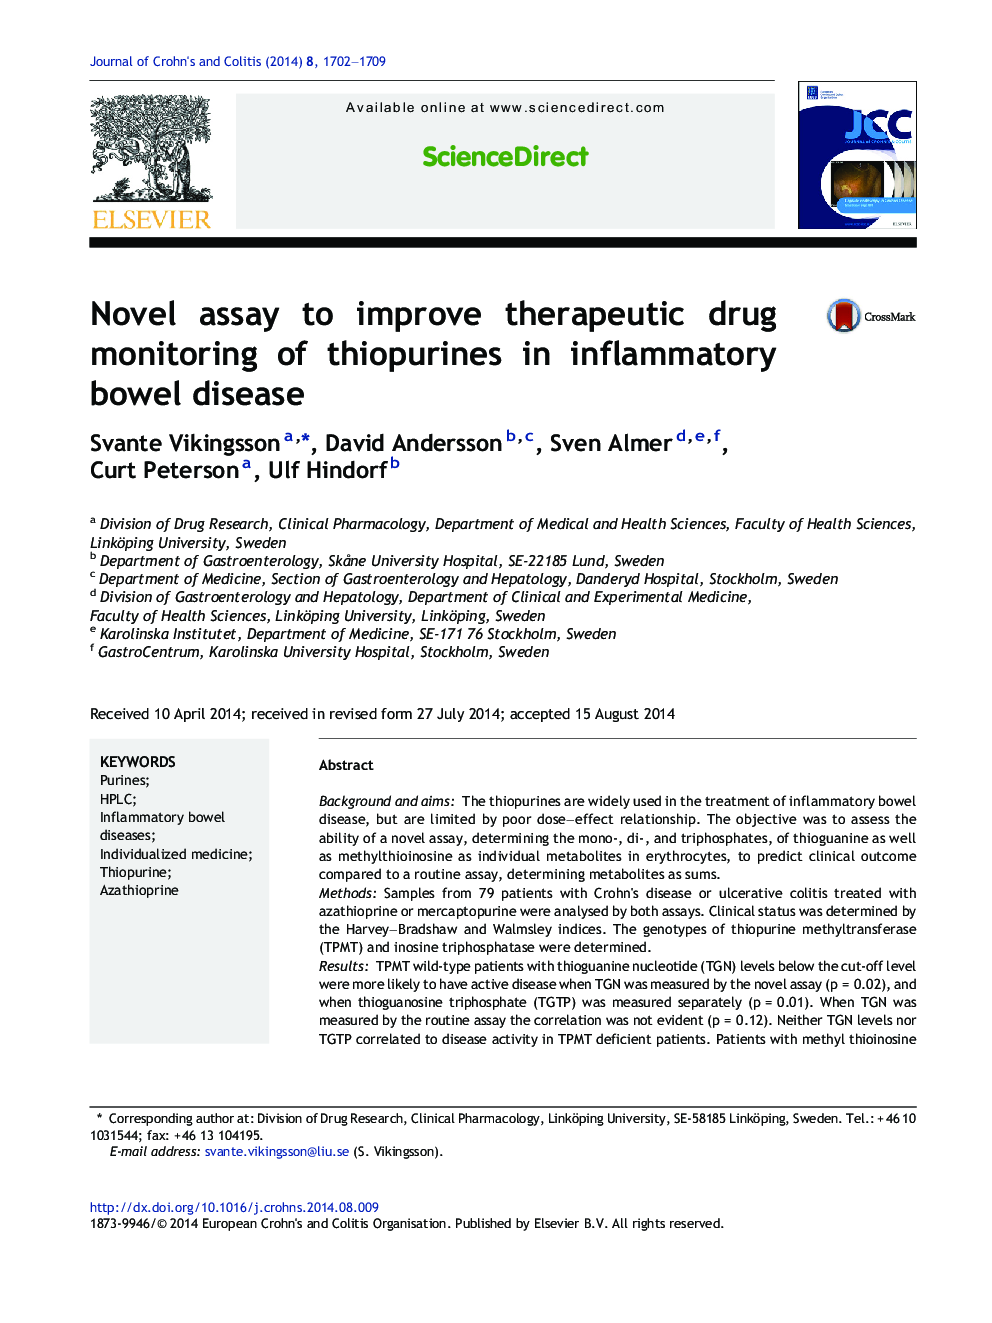 Novel assay to improve therapeutic drug monitoring of thiopurines in inflammatory bowel disease